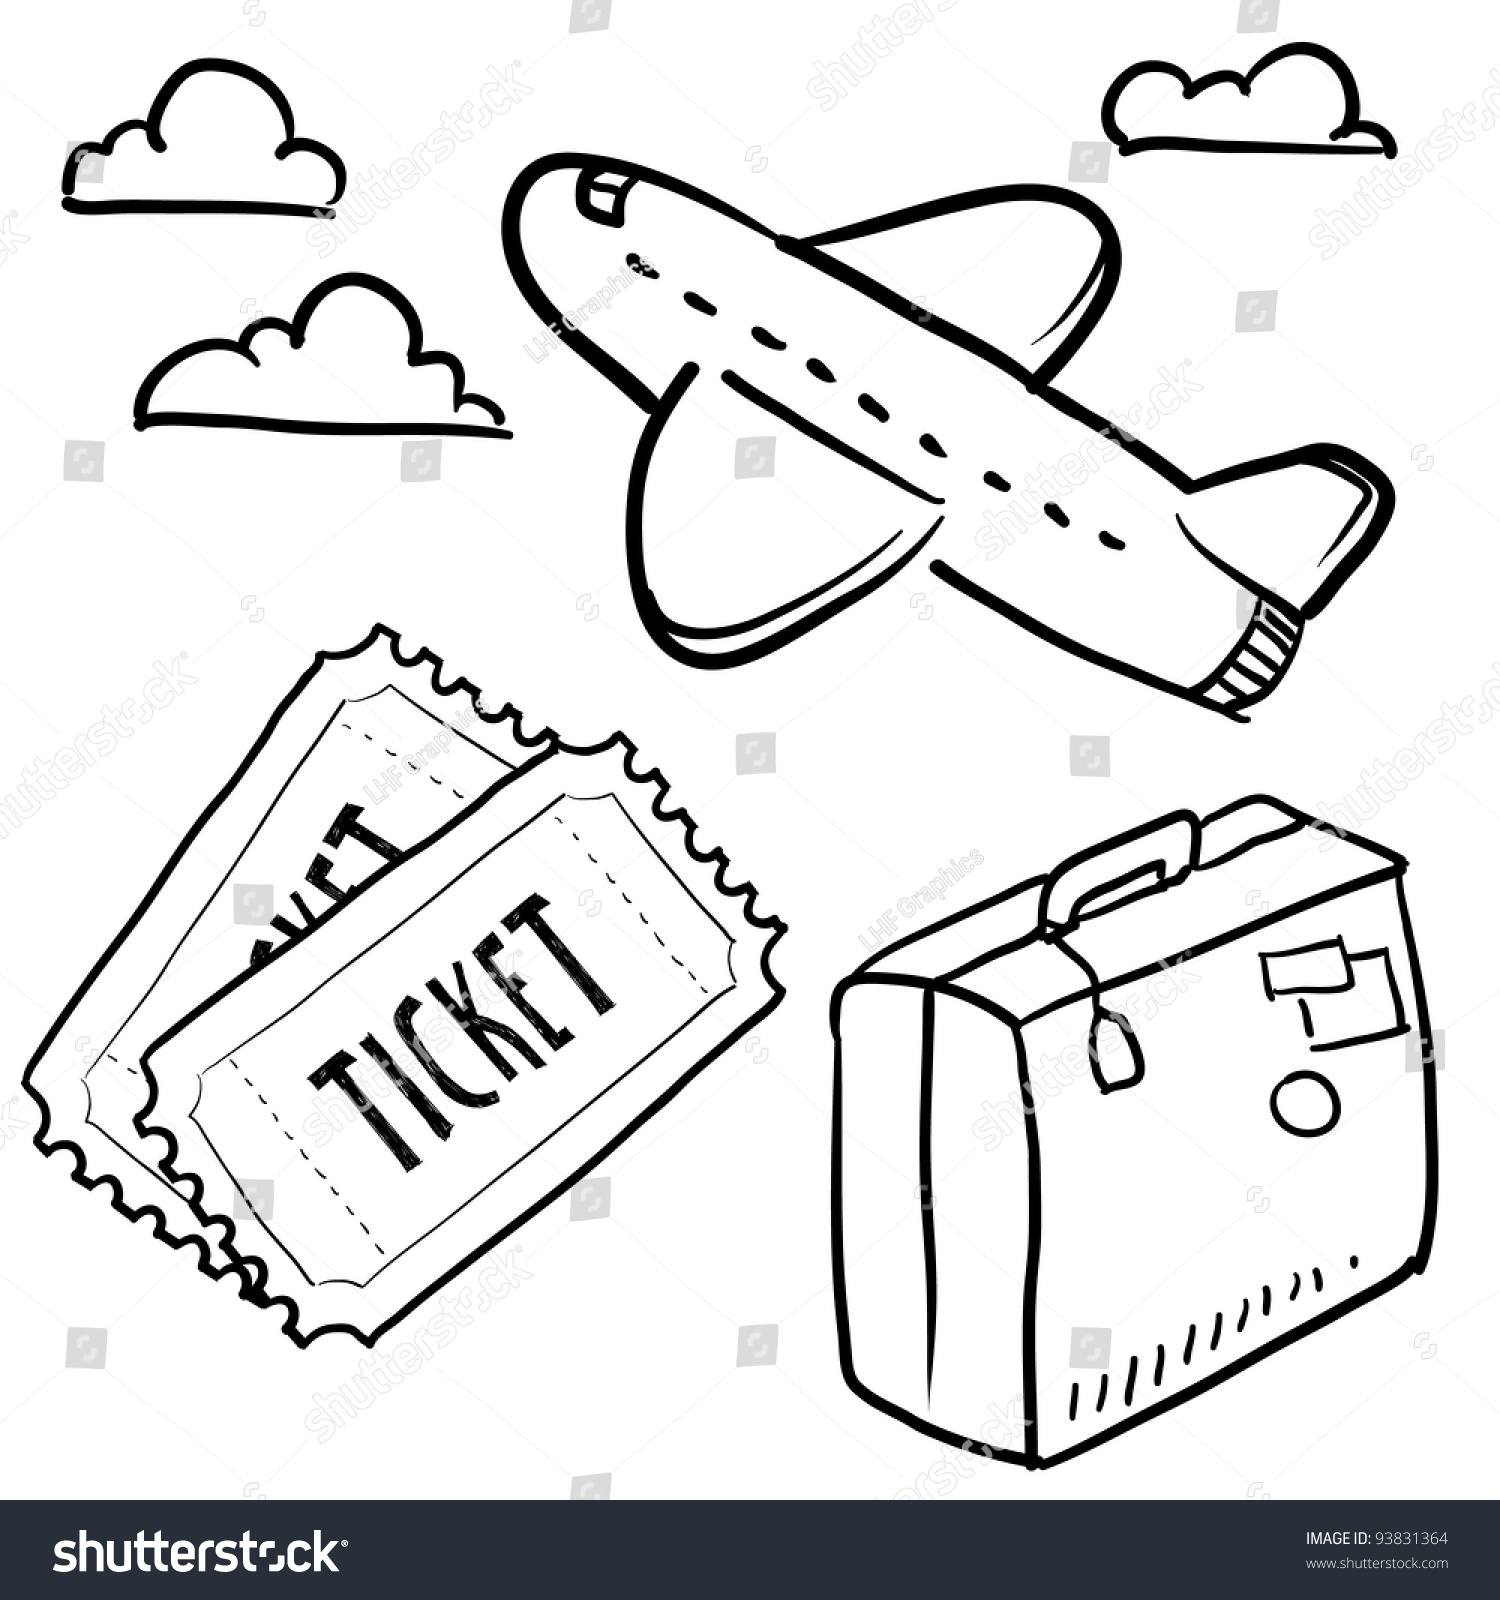 vintage travel clipart black and white - photo #34